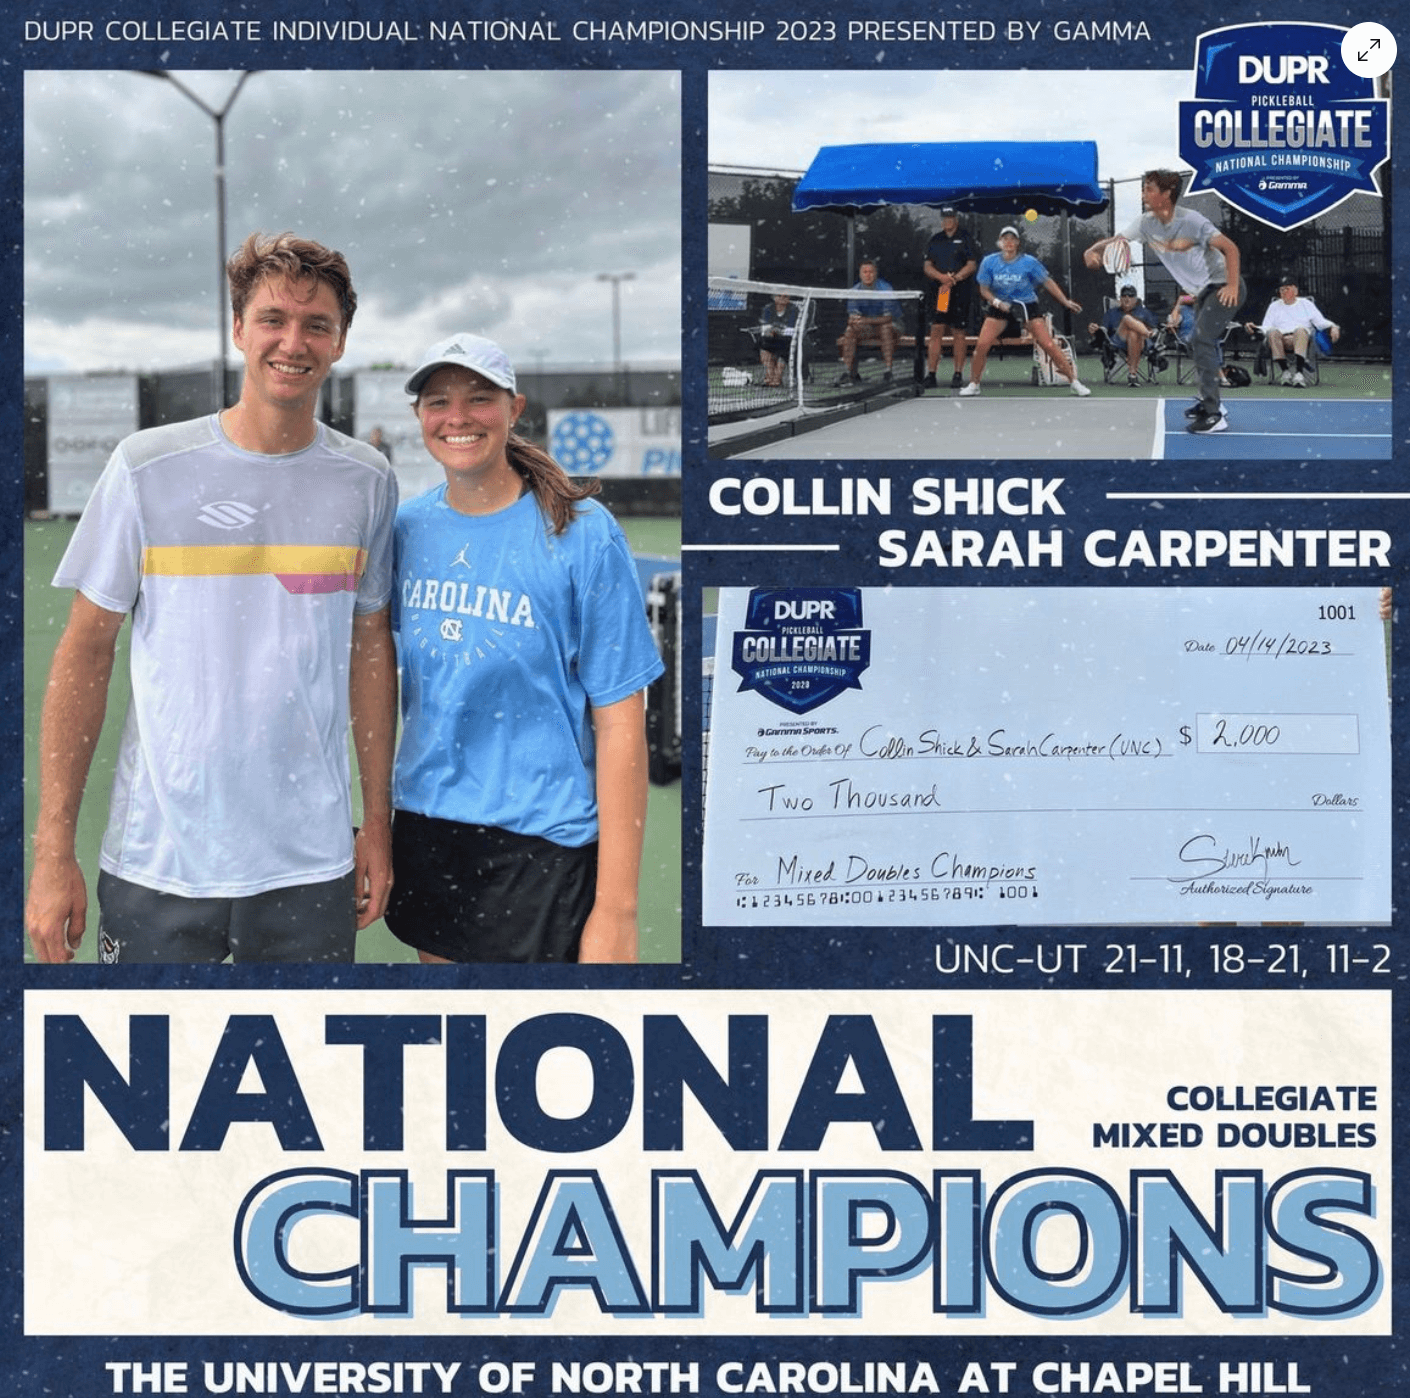 Doubles partners; DUPR; Championship Match; Ratings system DUPR holds collegiate events; Collin Shick and Sarah Carpenter win